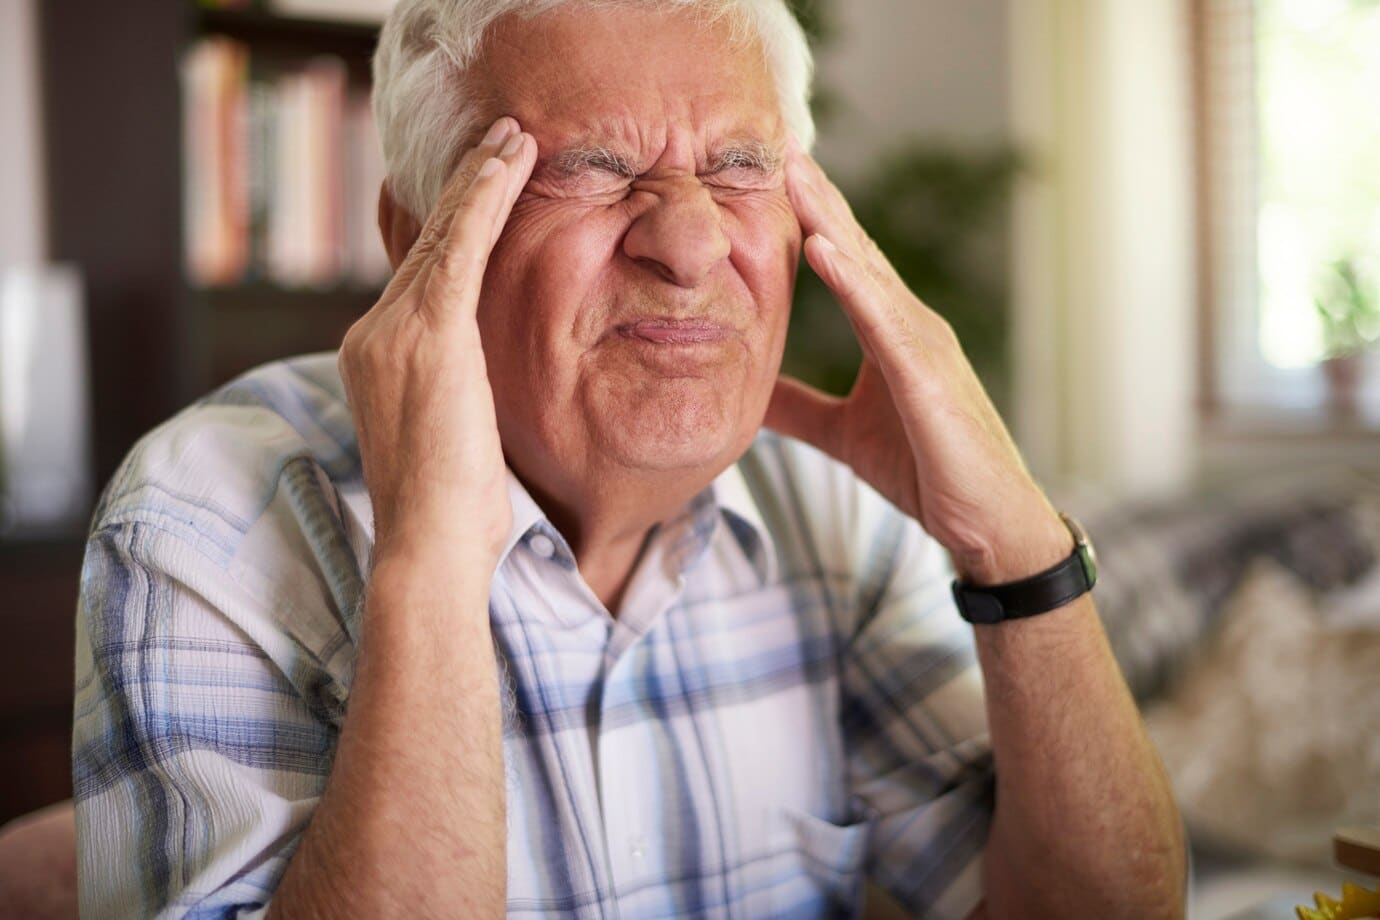 An elderly man grimacing in agony, clutching his head with a pained expression on his face.